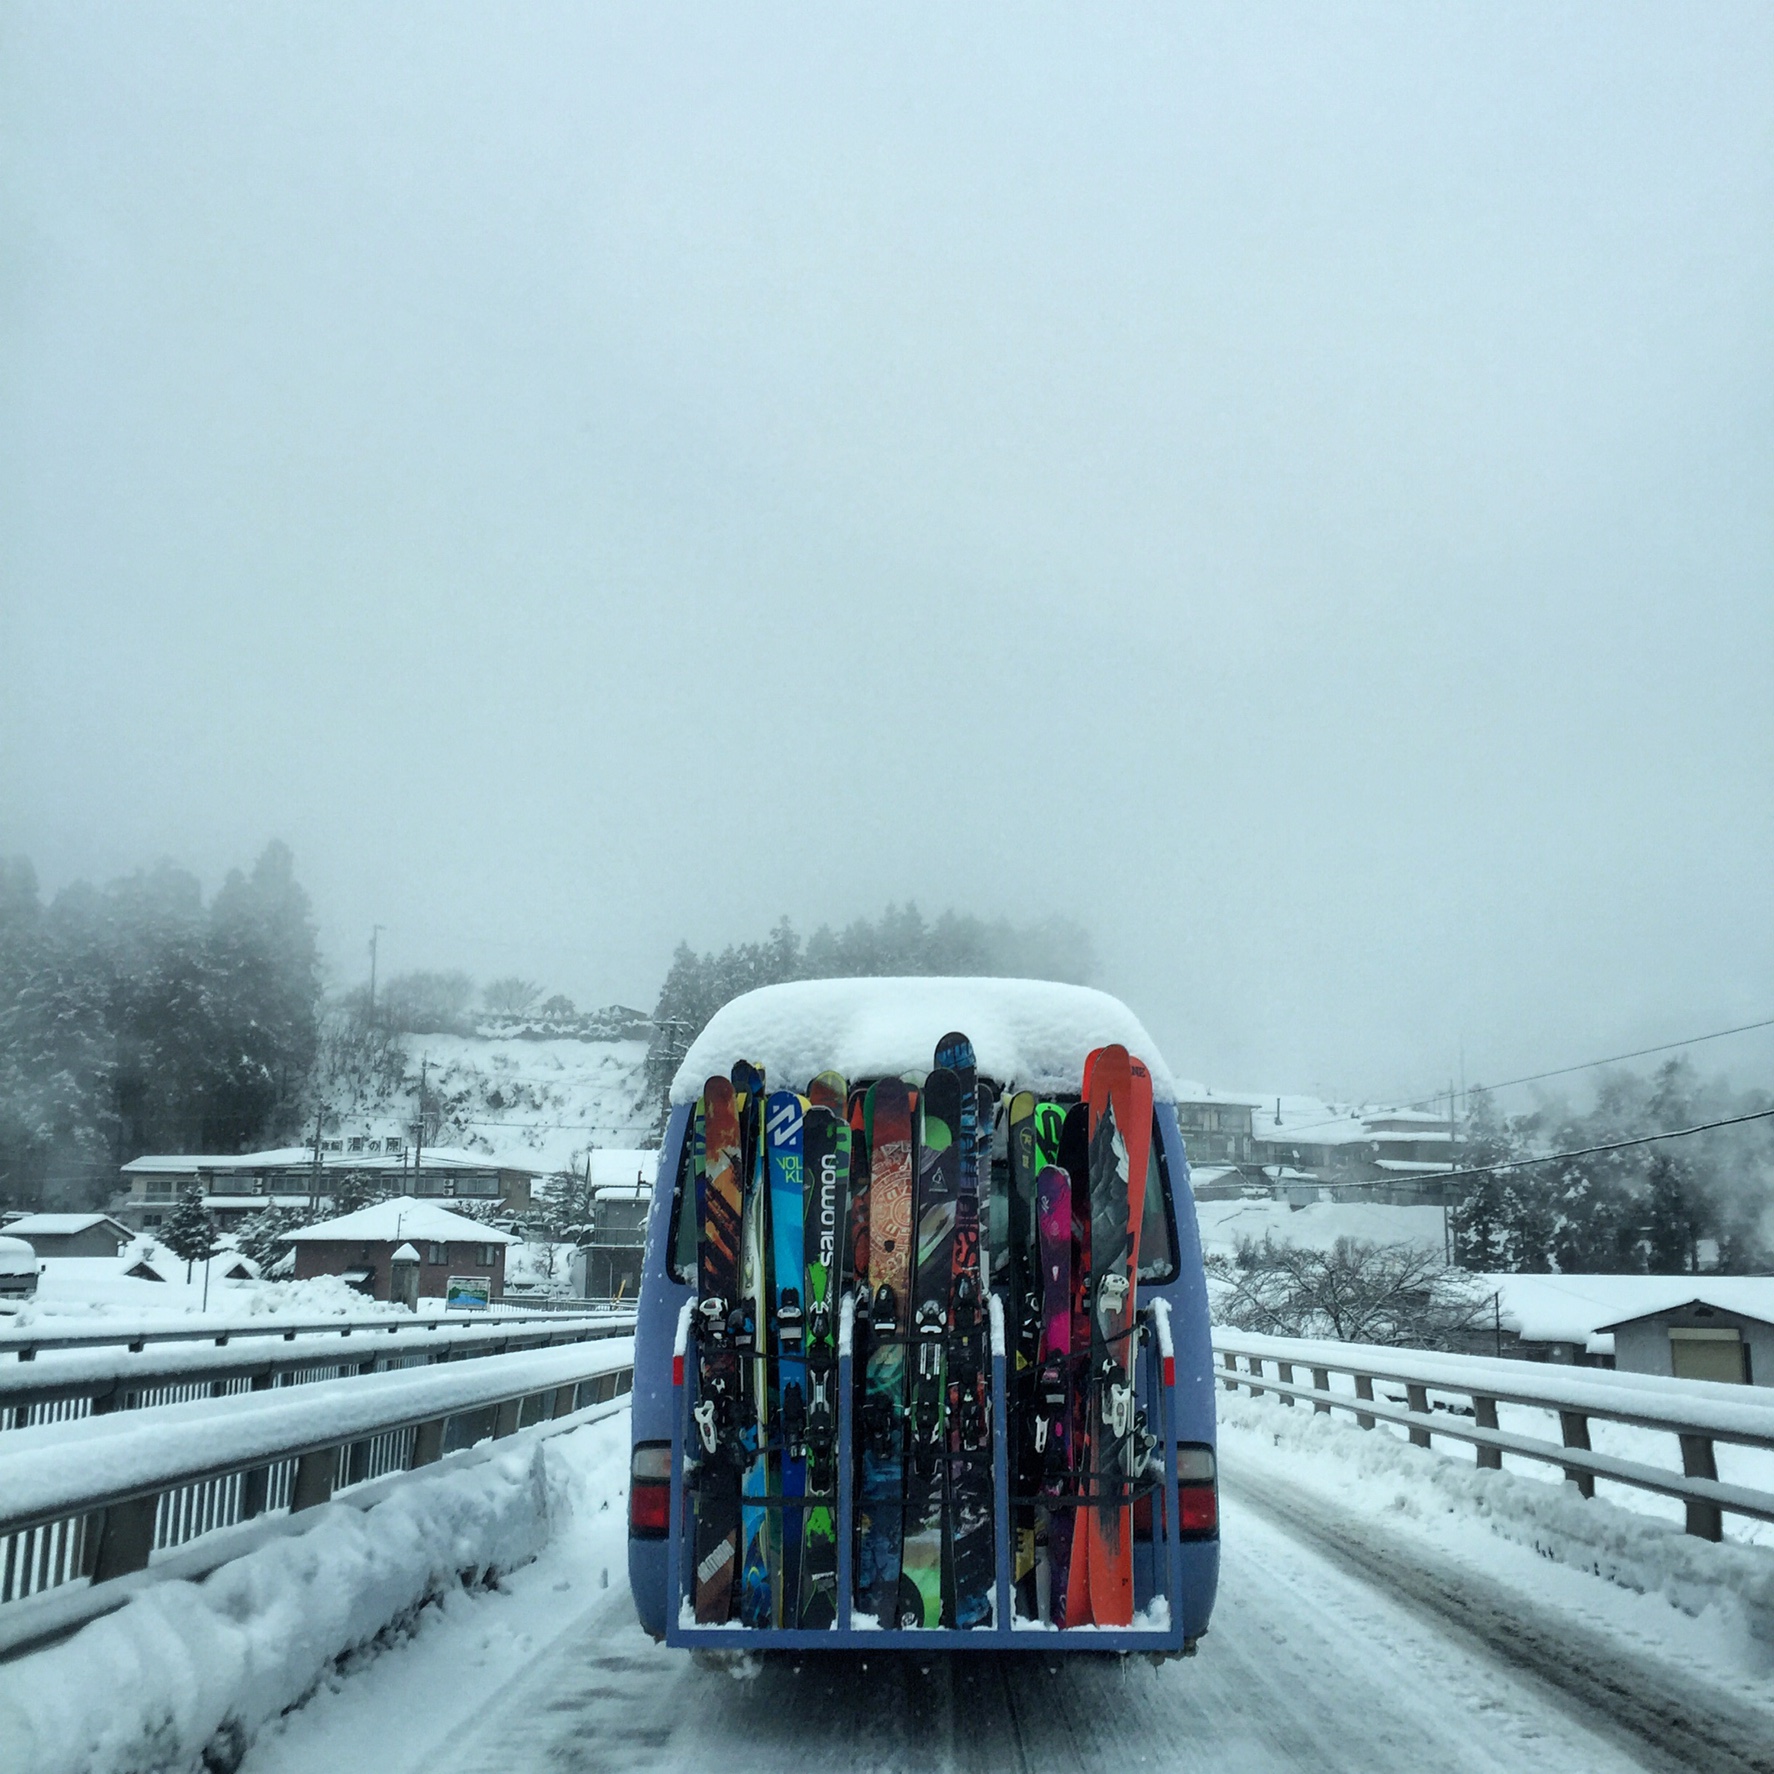 Nothing like seeing a bus full of fat skis.JPG